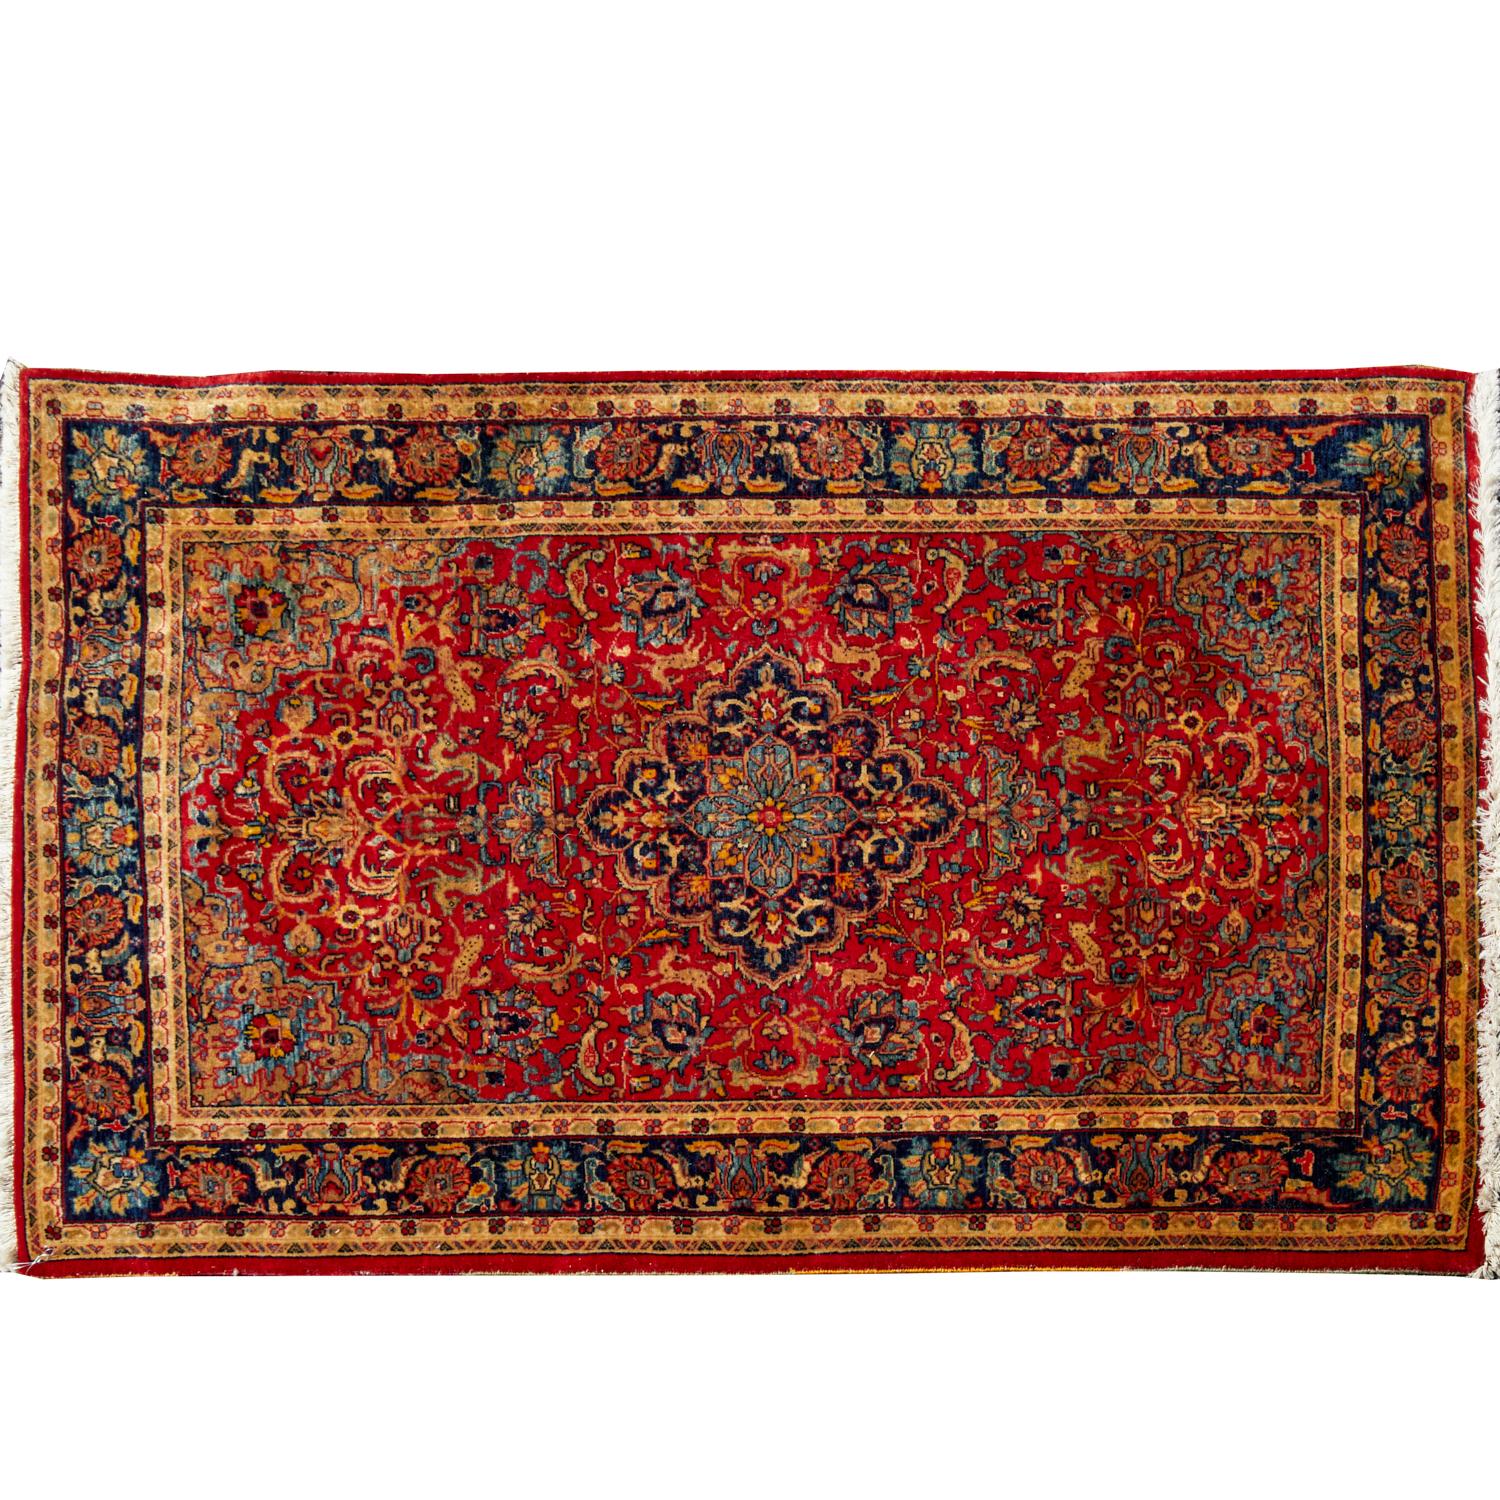 Cotton Early 20th C. Sarouk Rug with Tight Weave and Rich Jewel Tones For Sale